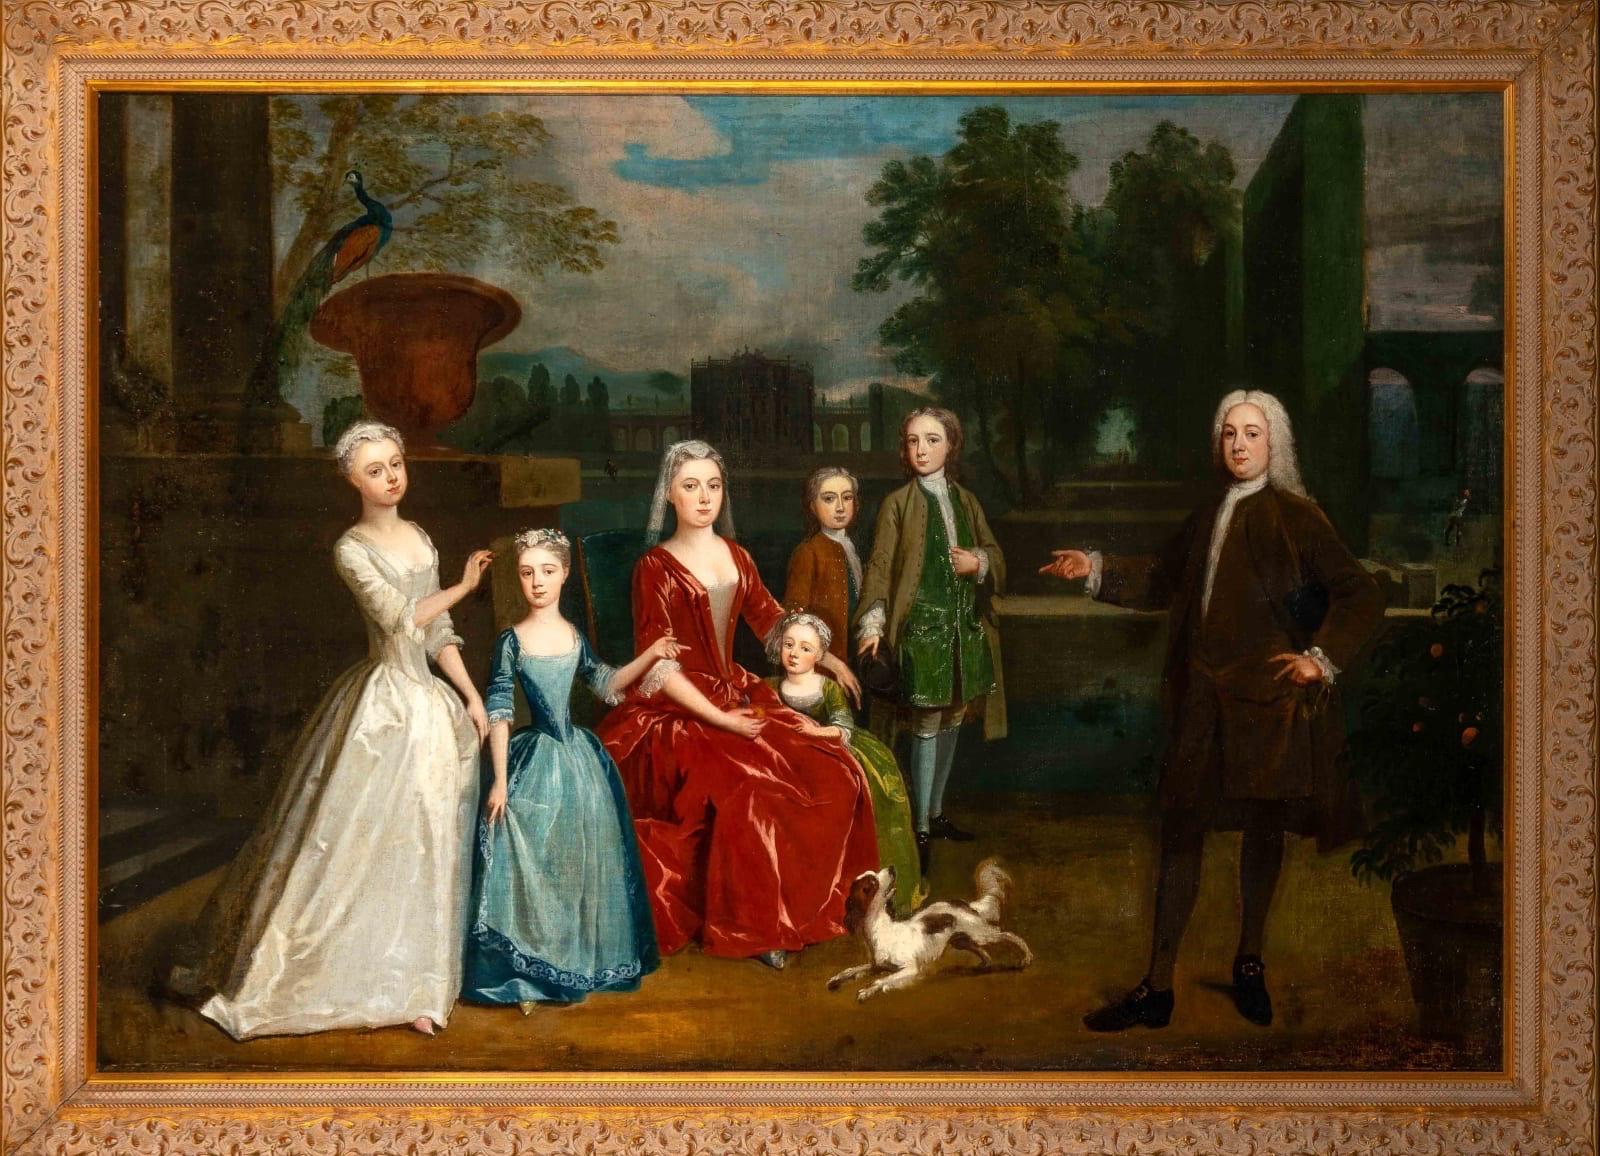 Charles Philips Portrait Painting - 18th century painting of the Dalbiac family in the gardens of a country house